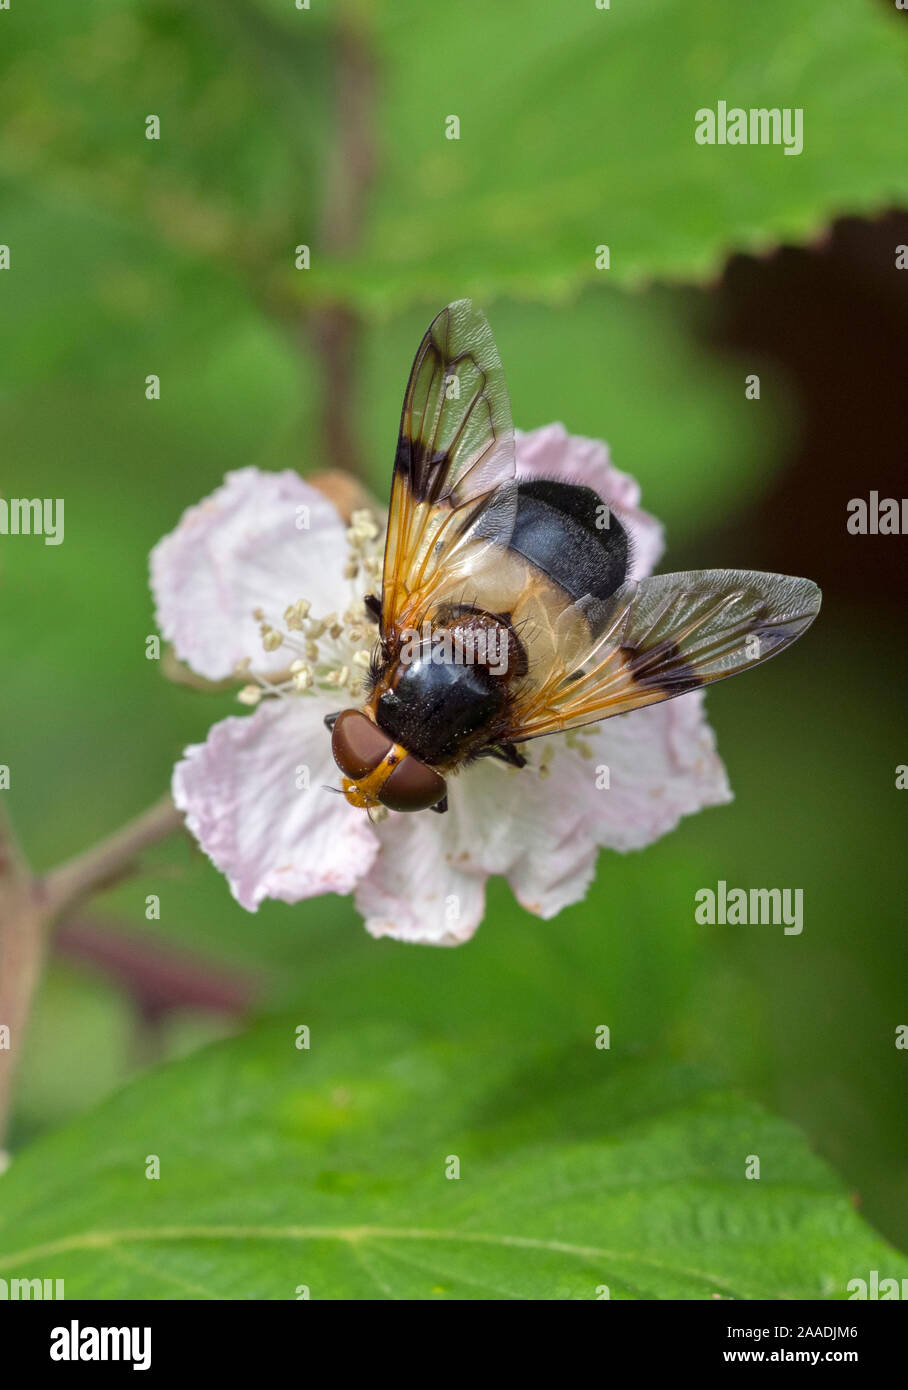 Great pied hoverfly (Volucella pellucens) feeding from bramble flower, Wiltshire, England, UK, July. Bumblebee mimic species. Stock Photo